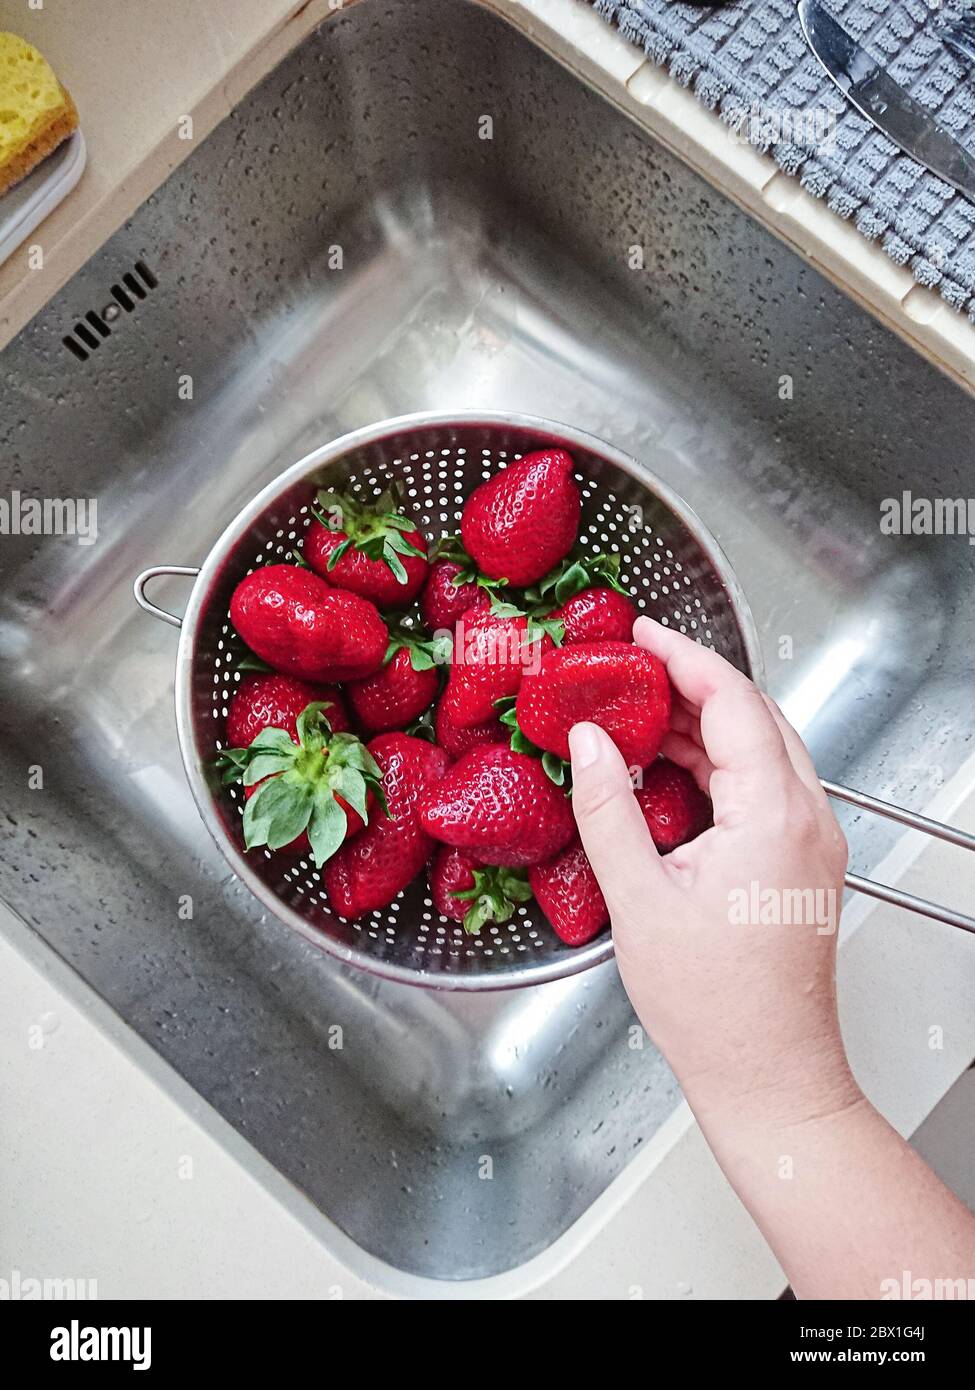 Washed ripe juicy red strawberries in mesh strainer above sink in kitchen, POV and top view Stock Photo